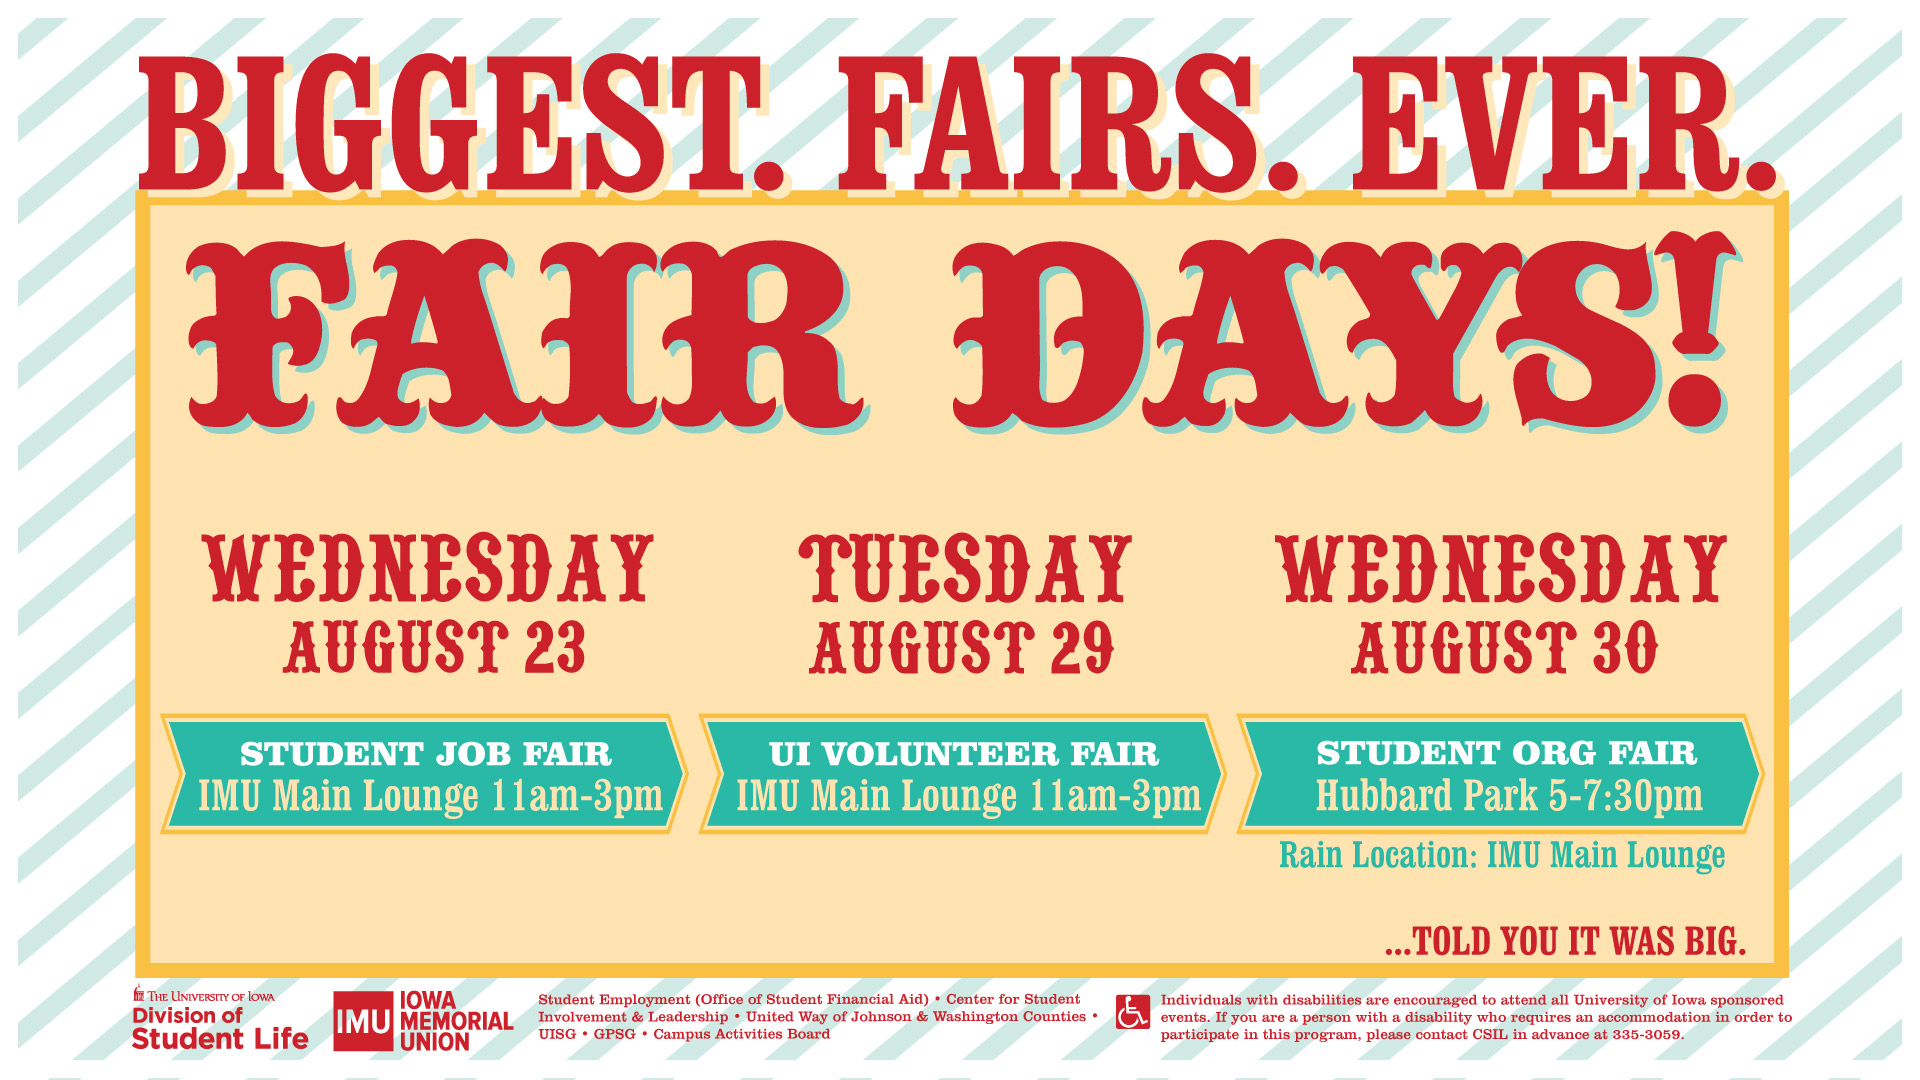 Dates and Times of Fair Days